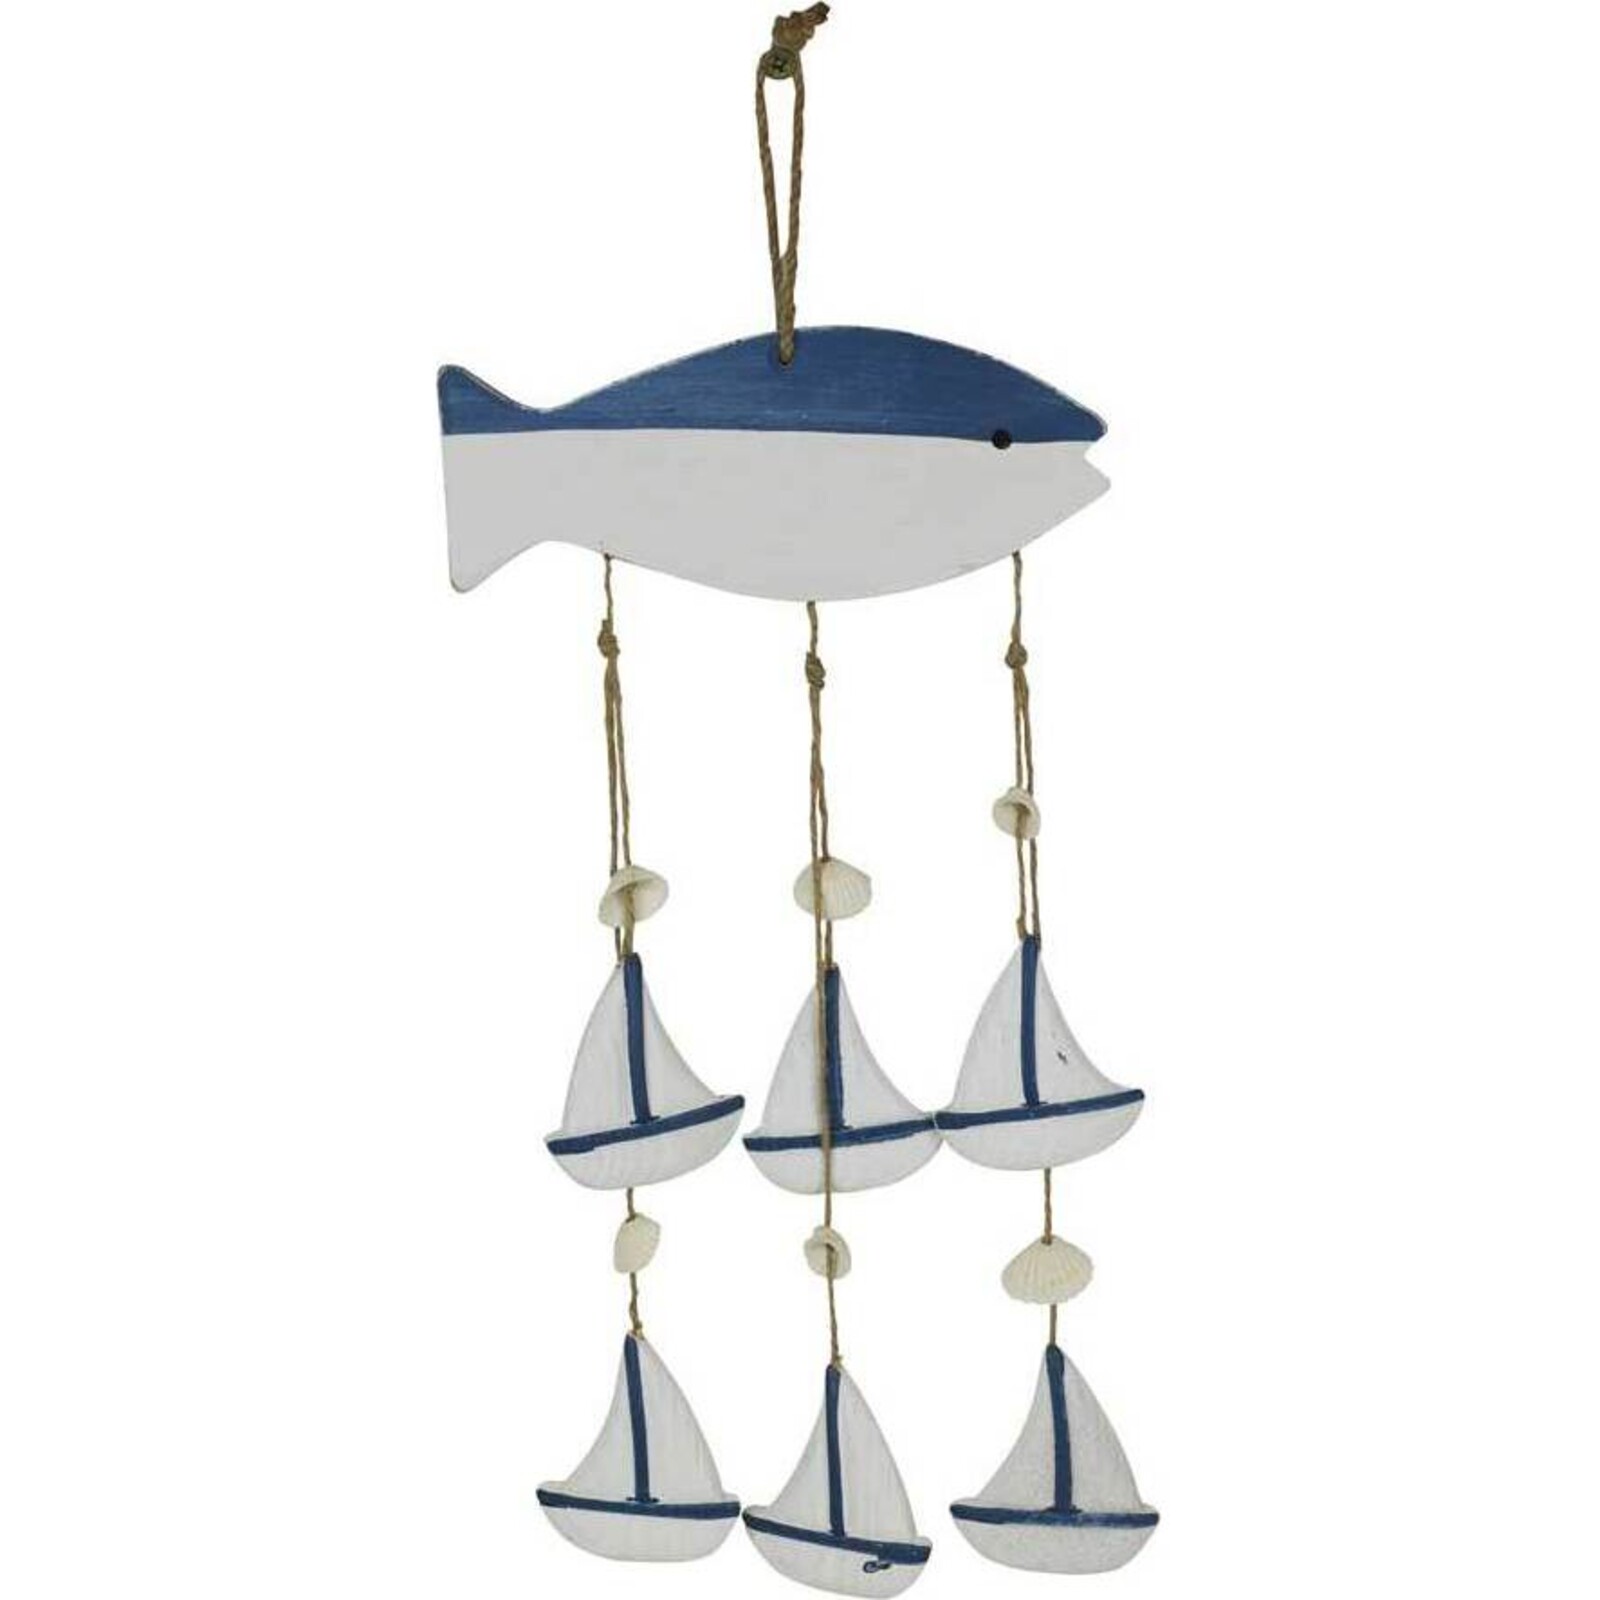 Hanging Fish with Boats